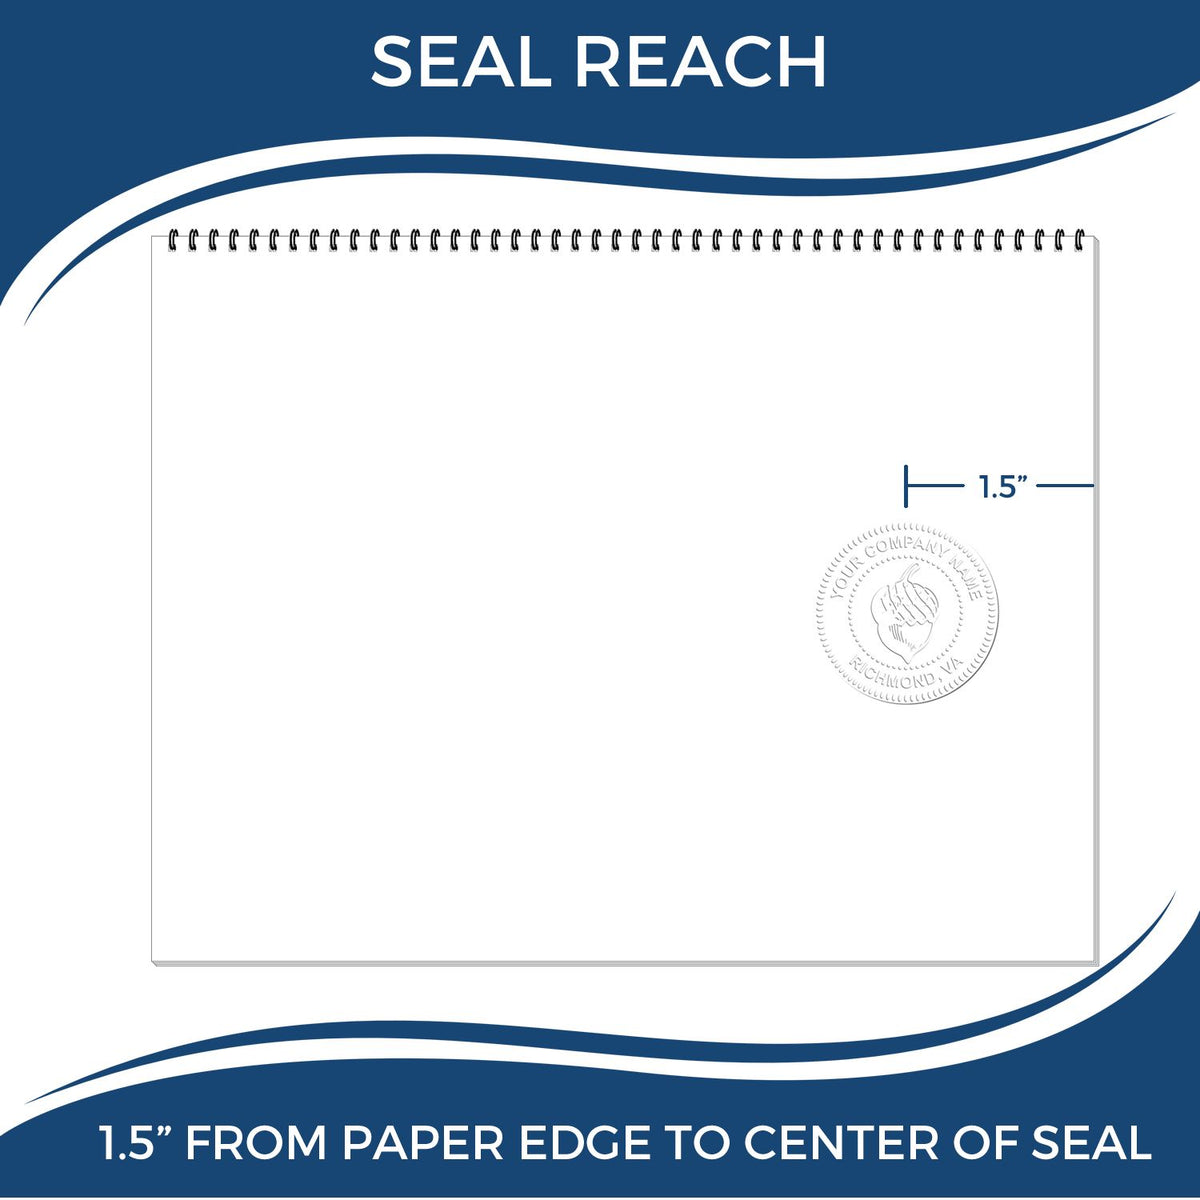 An infographic showing the seal reach which is represented by a ruler and a miniature seal image of the Handheld Michigan Professional Engineer Embosser